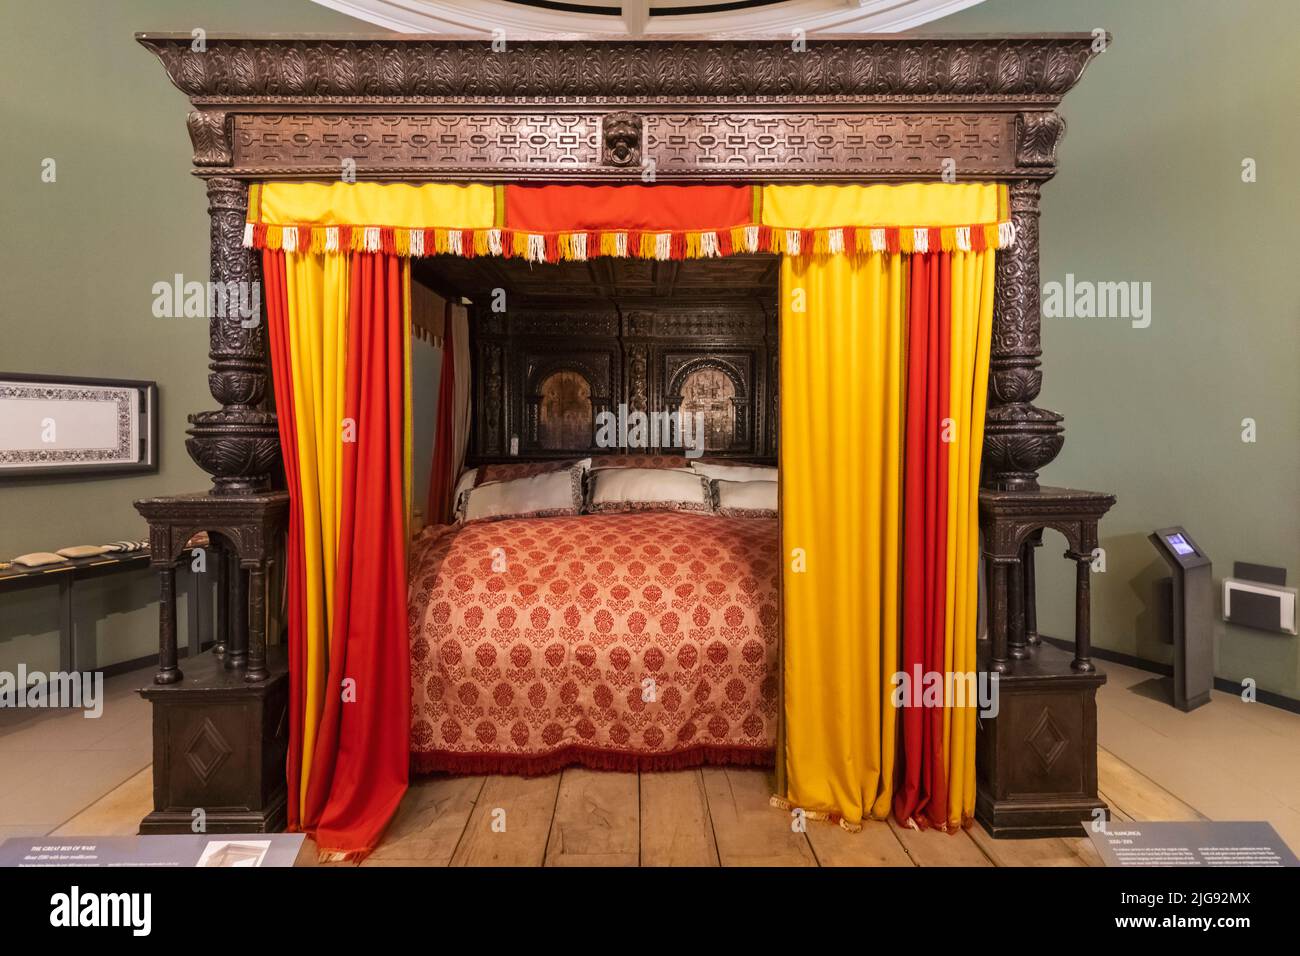 England, London, Knightsbridge, Victoria and Albert Museum, The Great Bed of Ware dated 1590 Stock Photo